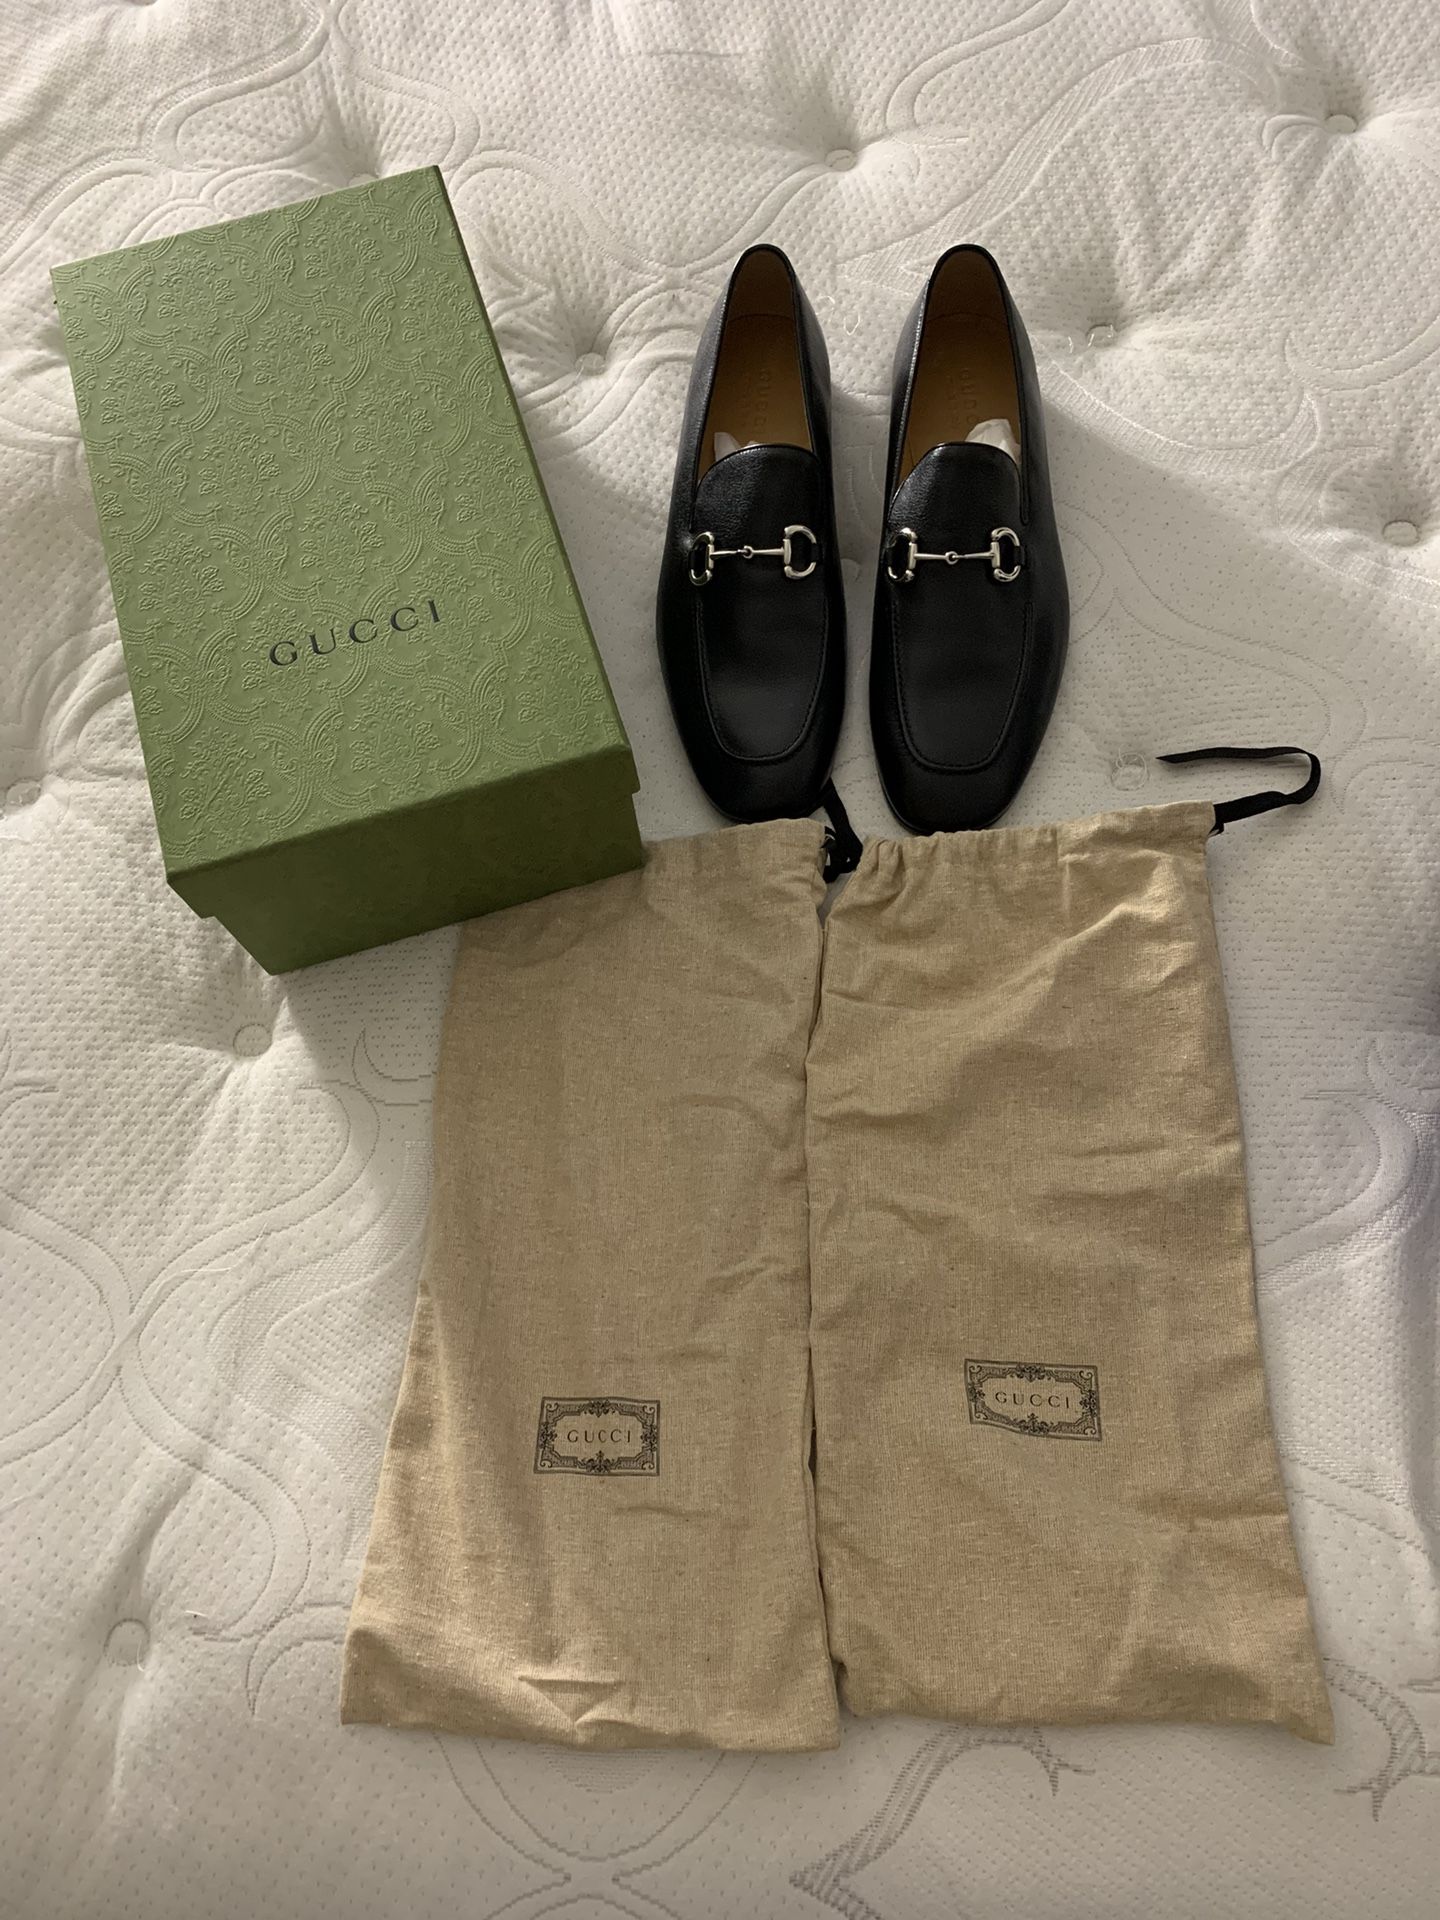 Men’s Gucci Loafers